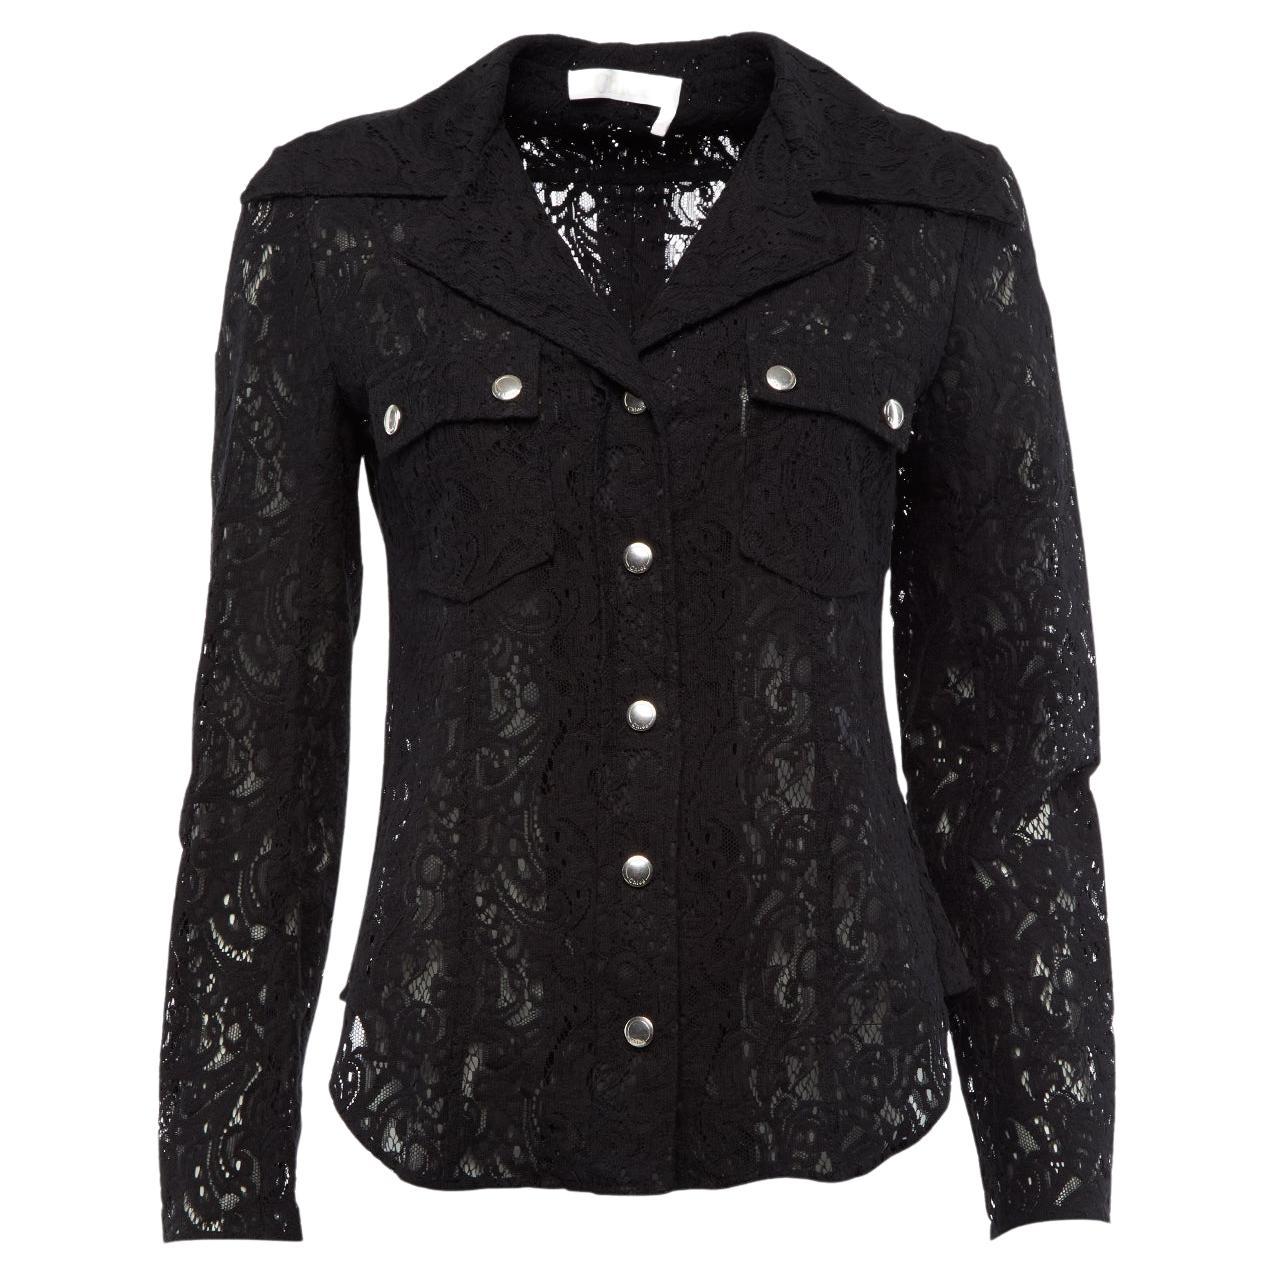 Pre-Loved Chloé Women's Sheer Lace Over Jacket